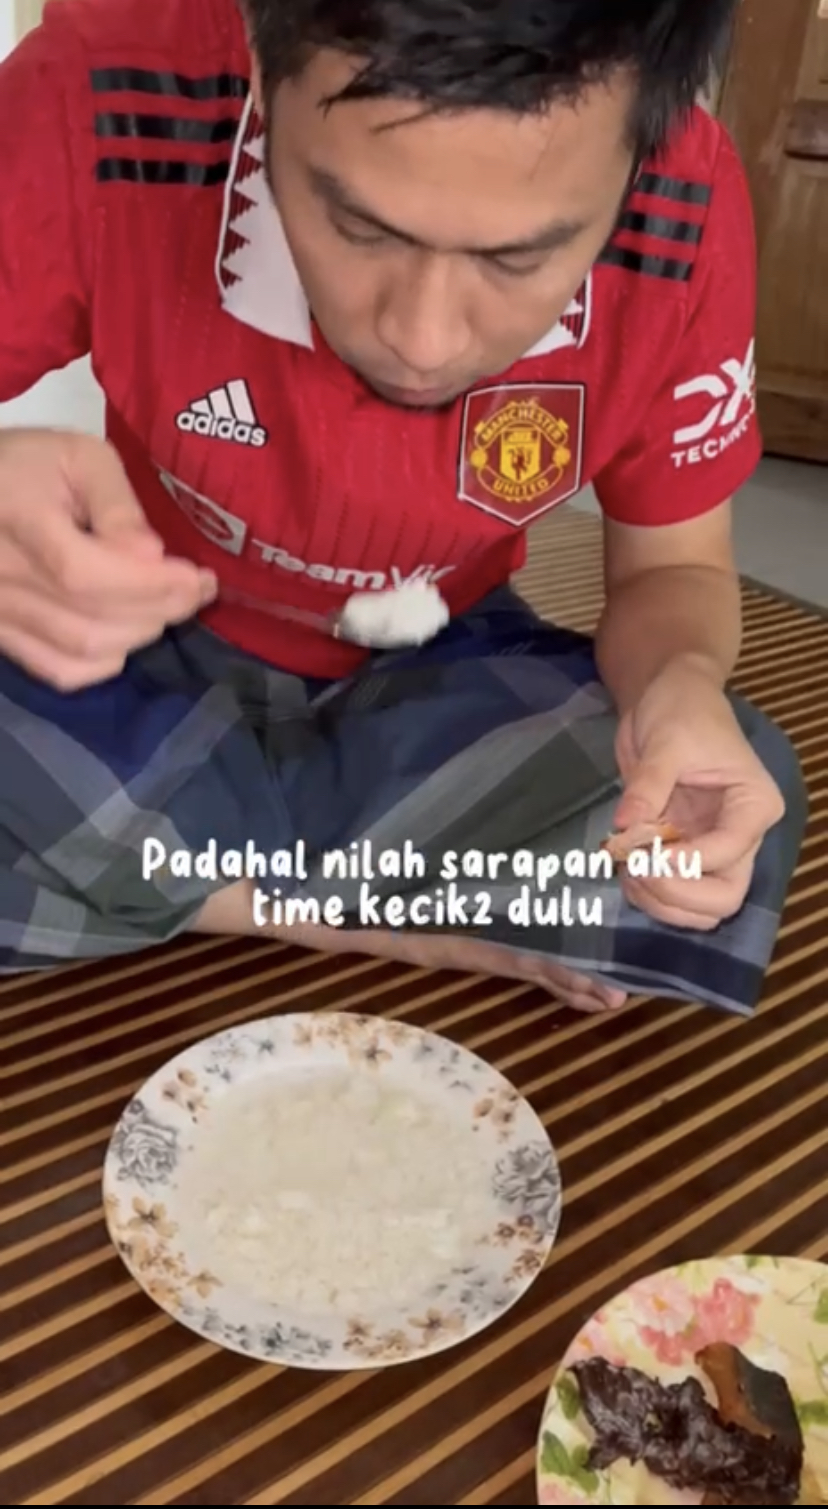 Man eats plain rice with mineral water, says he’s been eating it since he was a kid